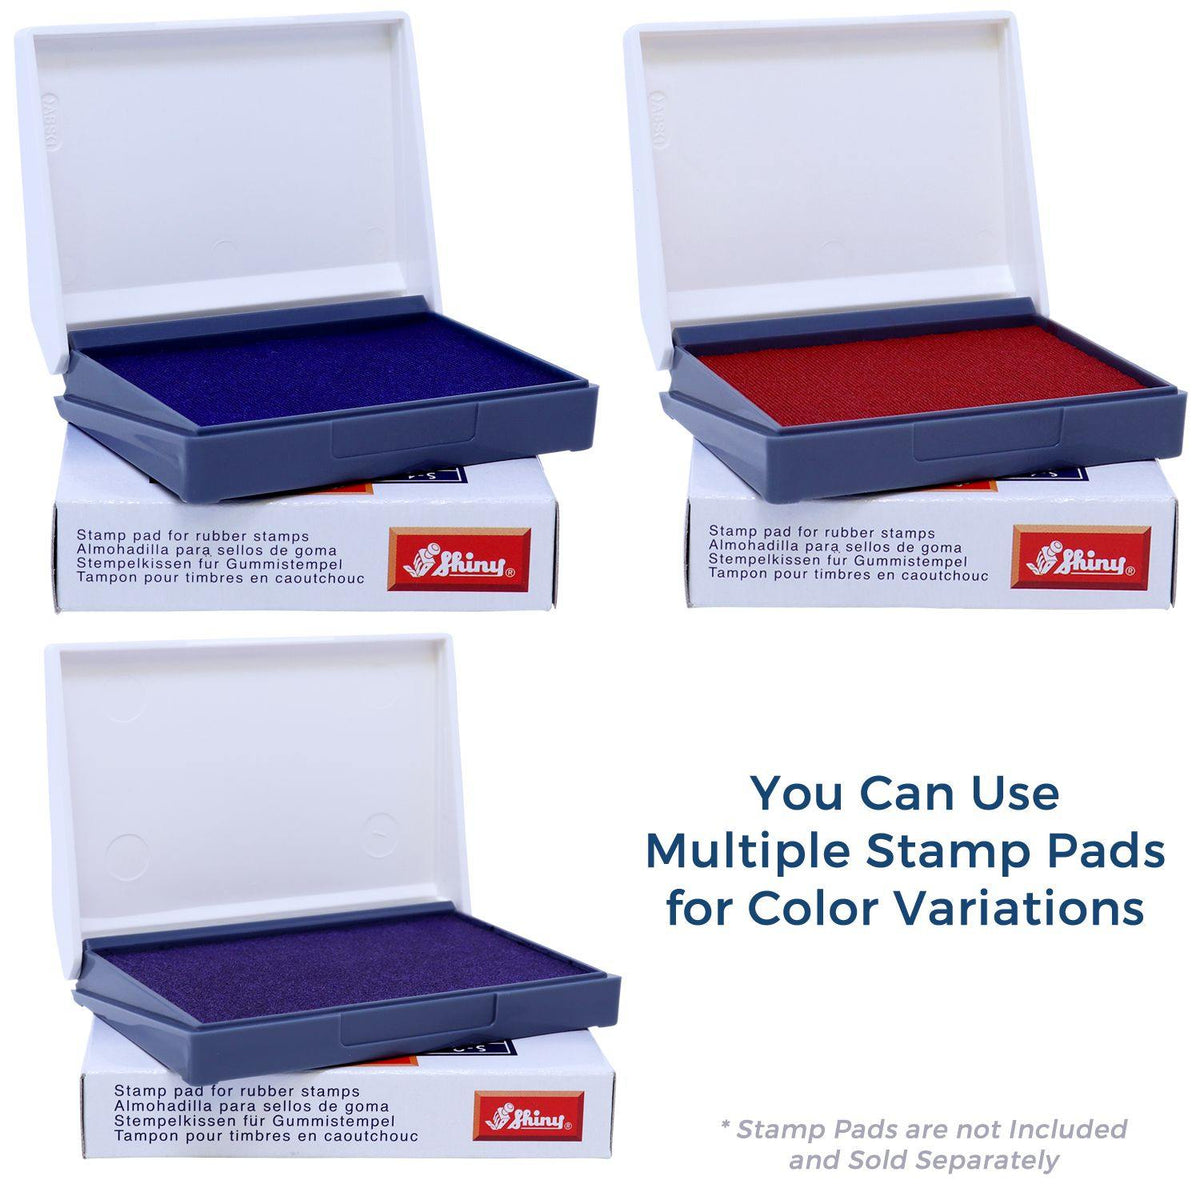 Stamp Pads for Bold Covid-19 Rubber Stamp Available